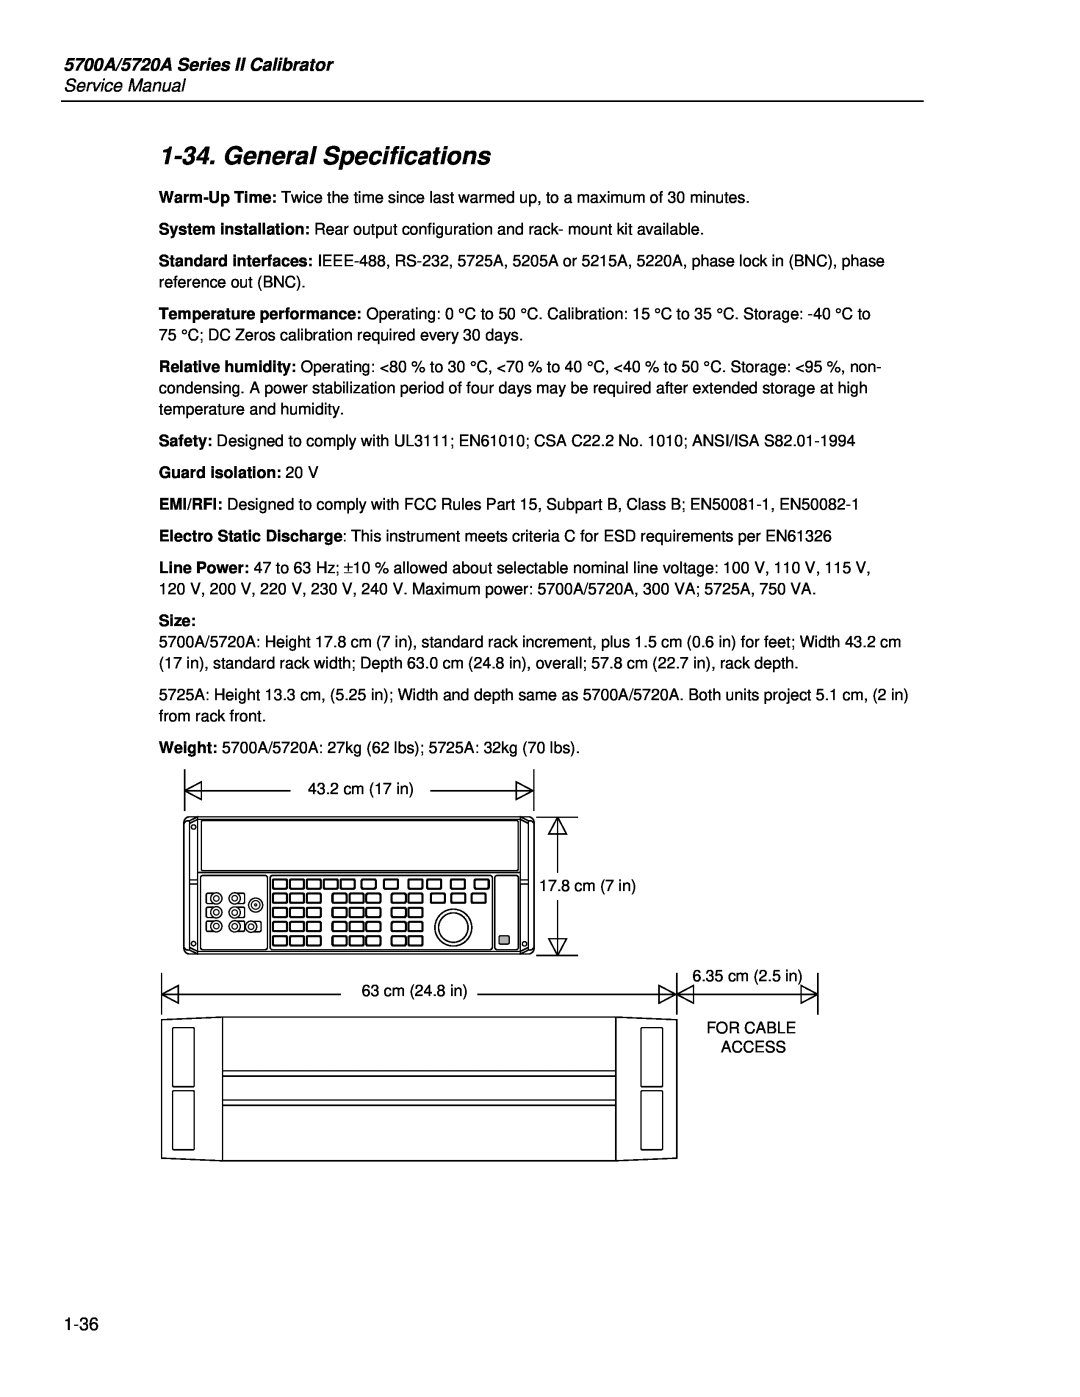 Fluke service manual General Specifications, 5700A/5720A Series II Calibrator, Service Manual, Guard isolation 20, Size 